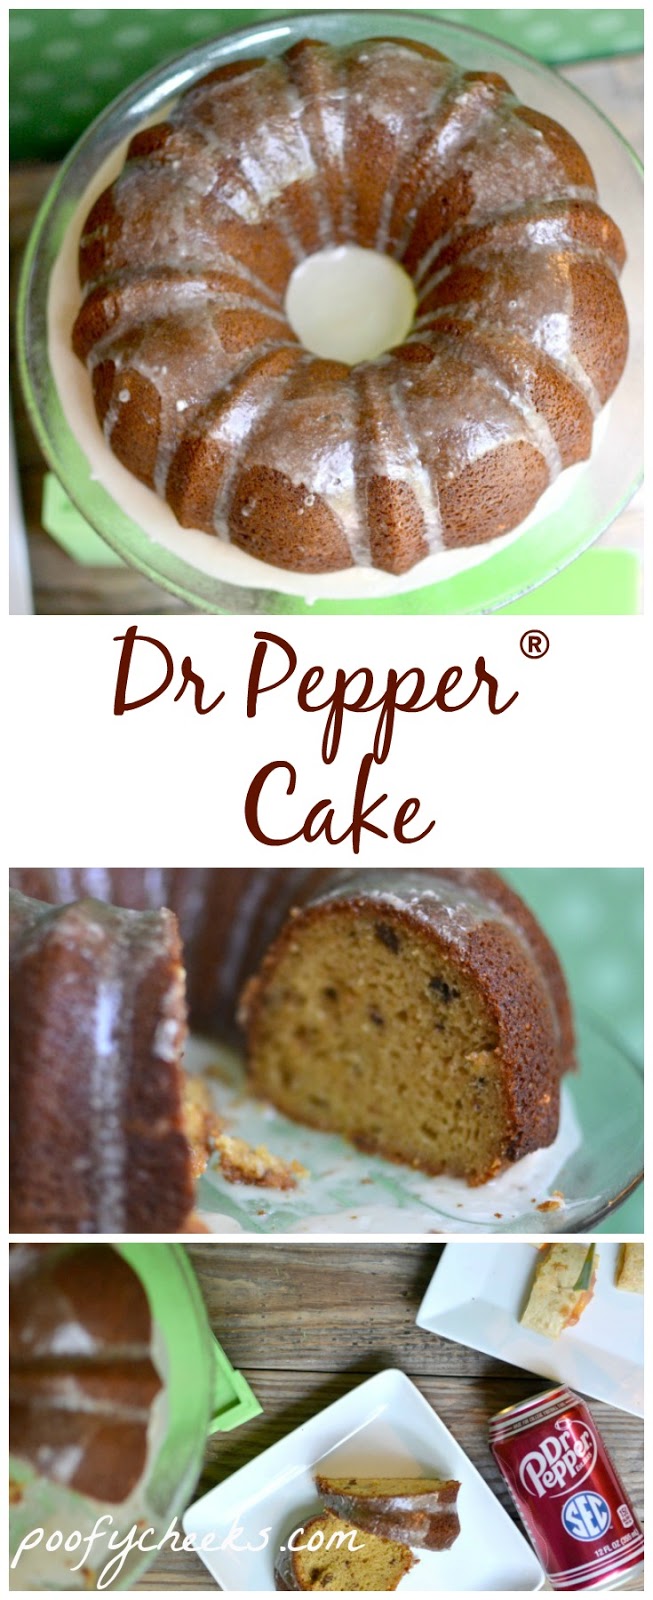 Dr. Pepper Cake Recipe - a family favorite dessert for when we all gather together.